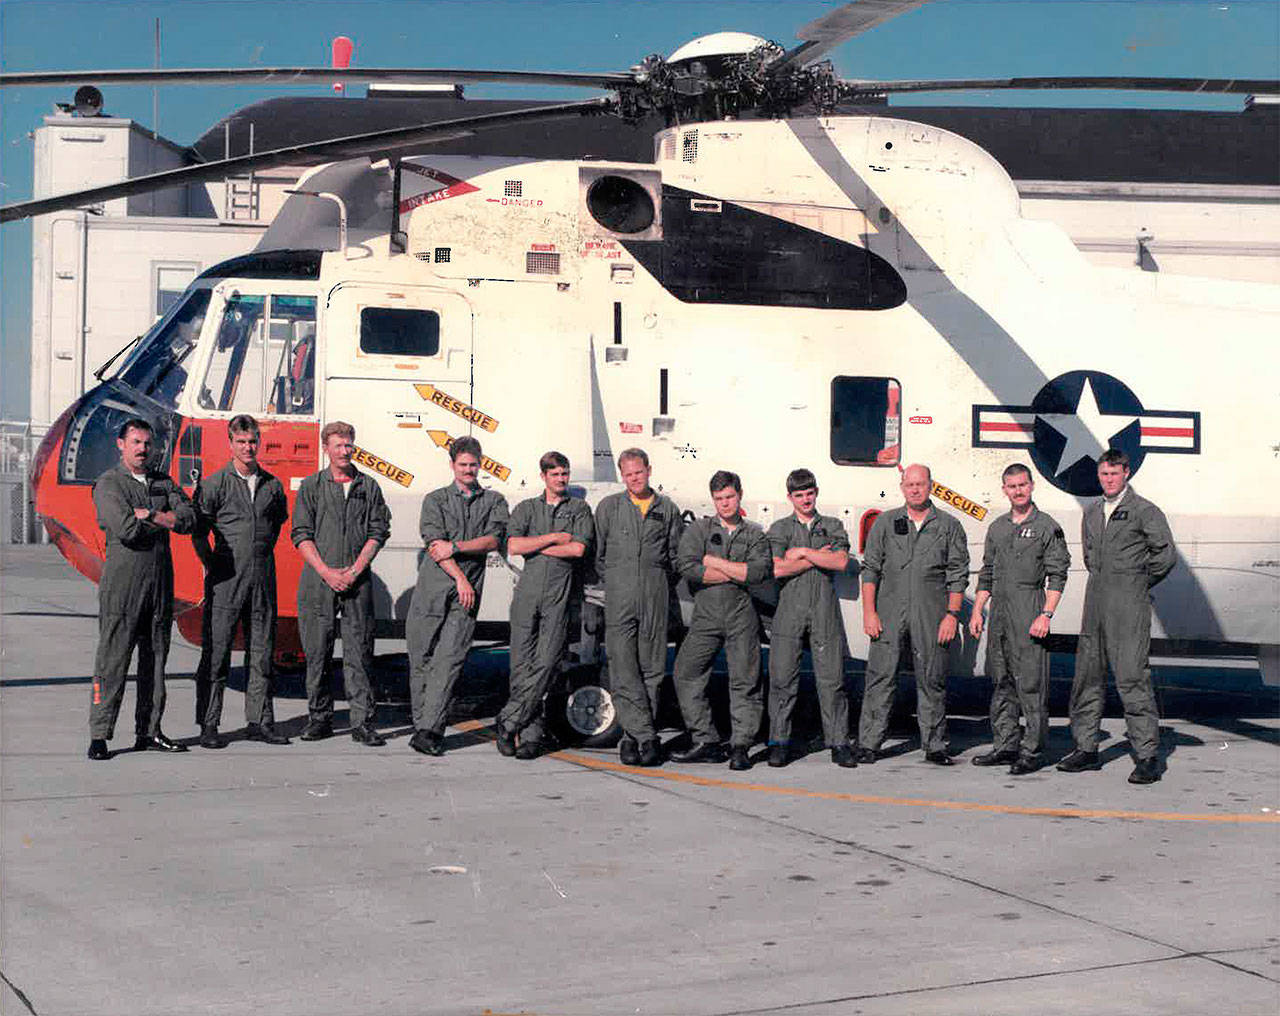 Former Search and Rescue members reunite